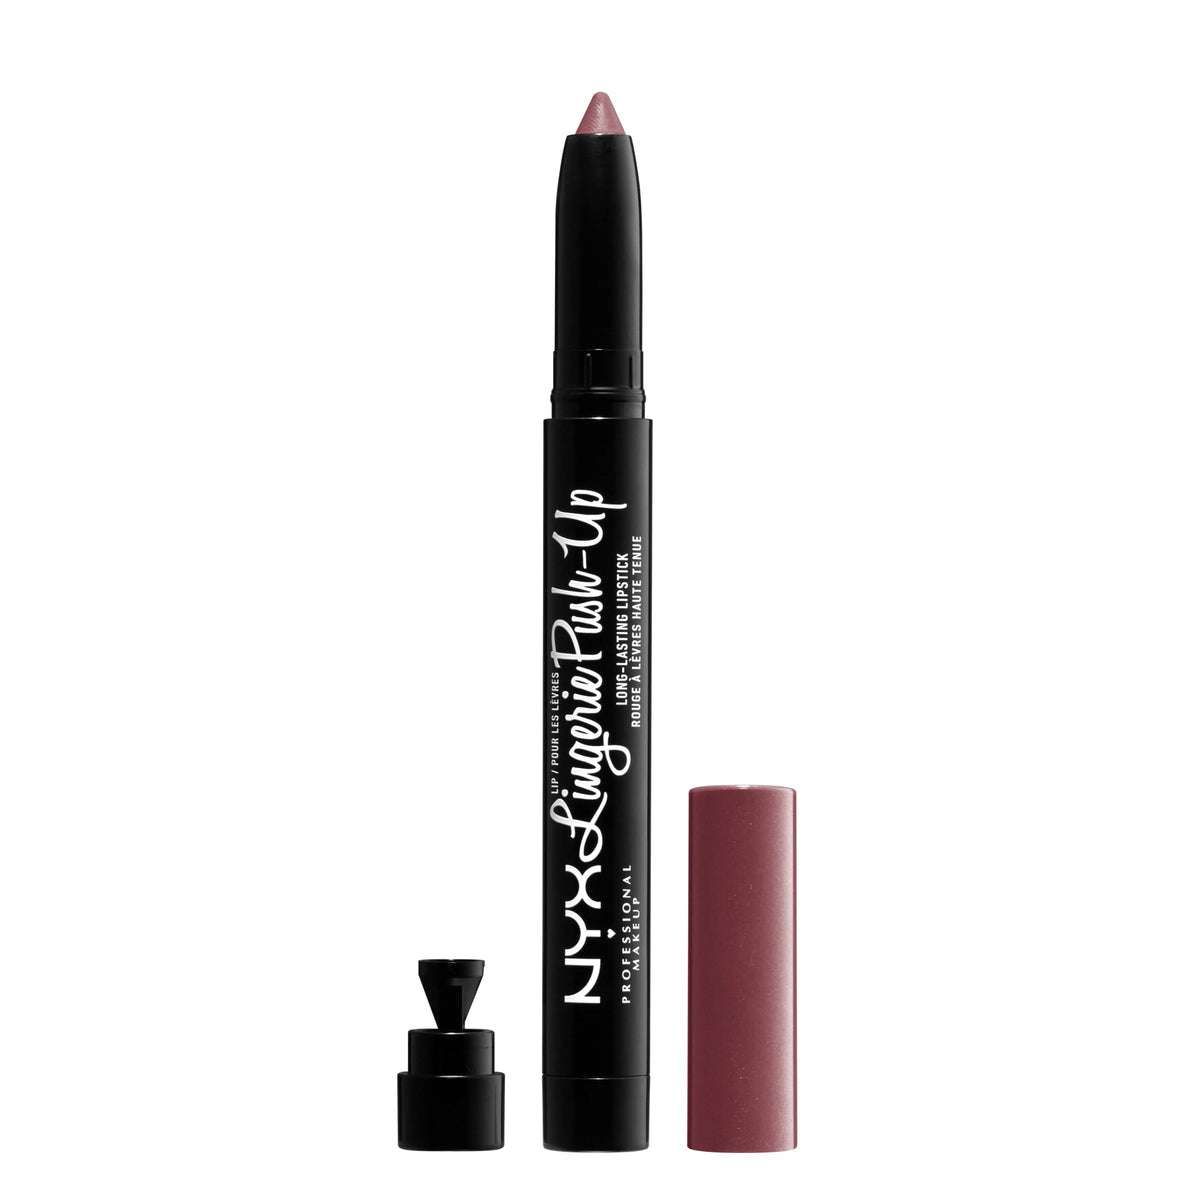 NYX Cosmetics Lip Lingerie Push Up Long-Lasting Lipstick 1.5g Color French Maid